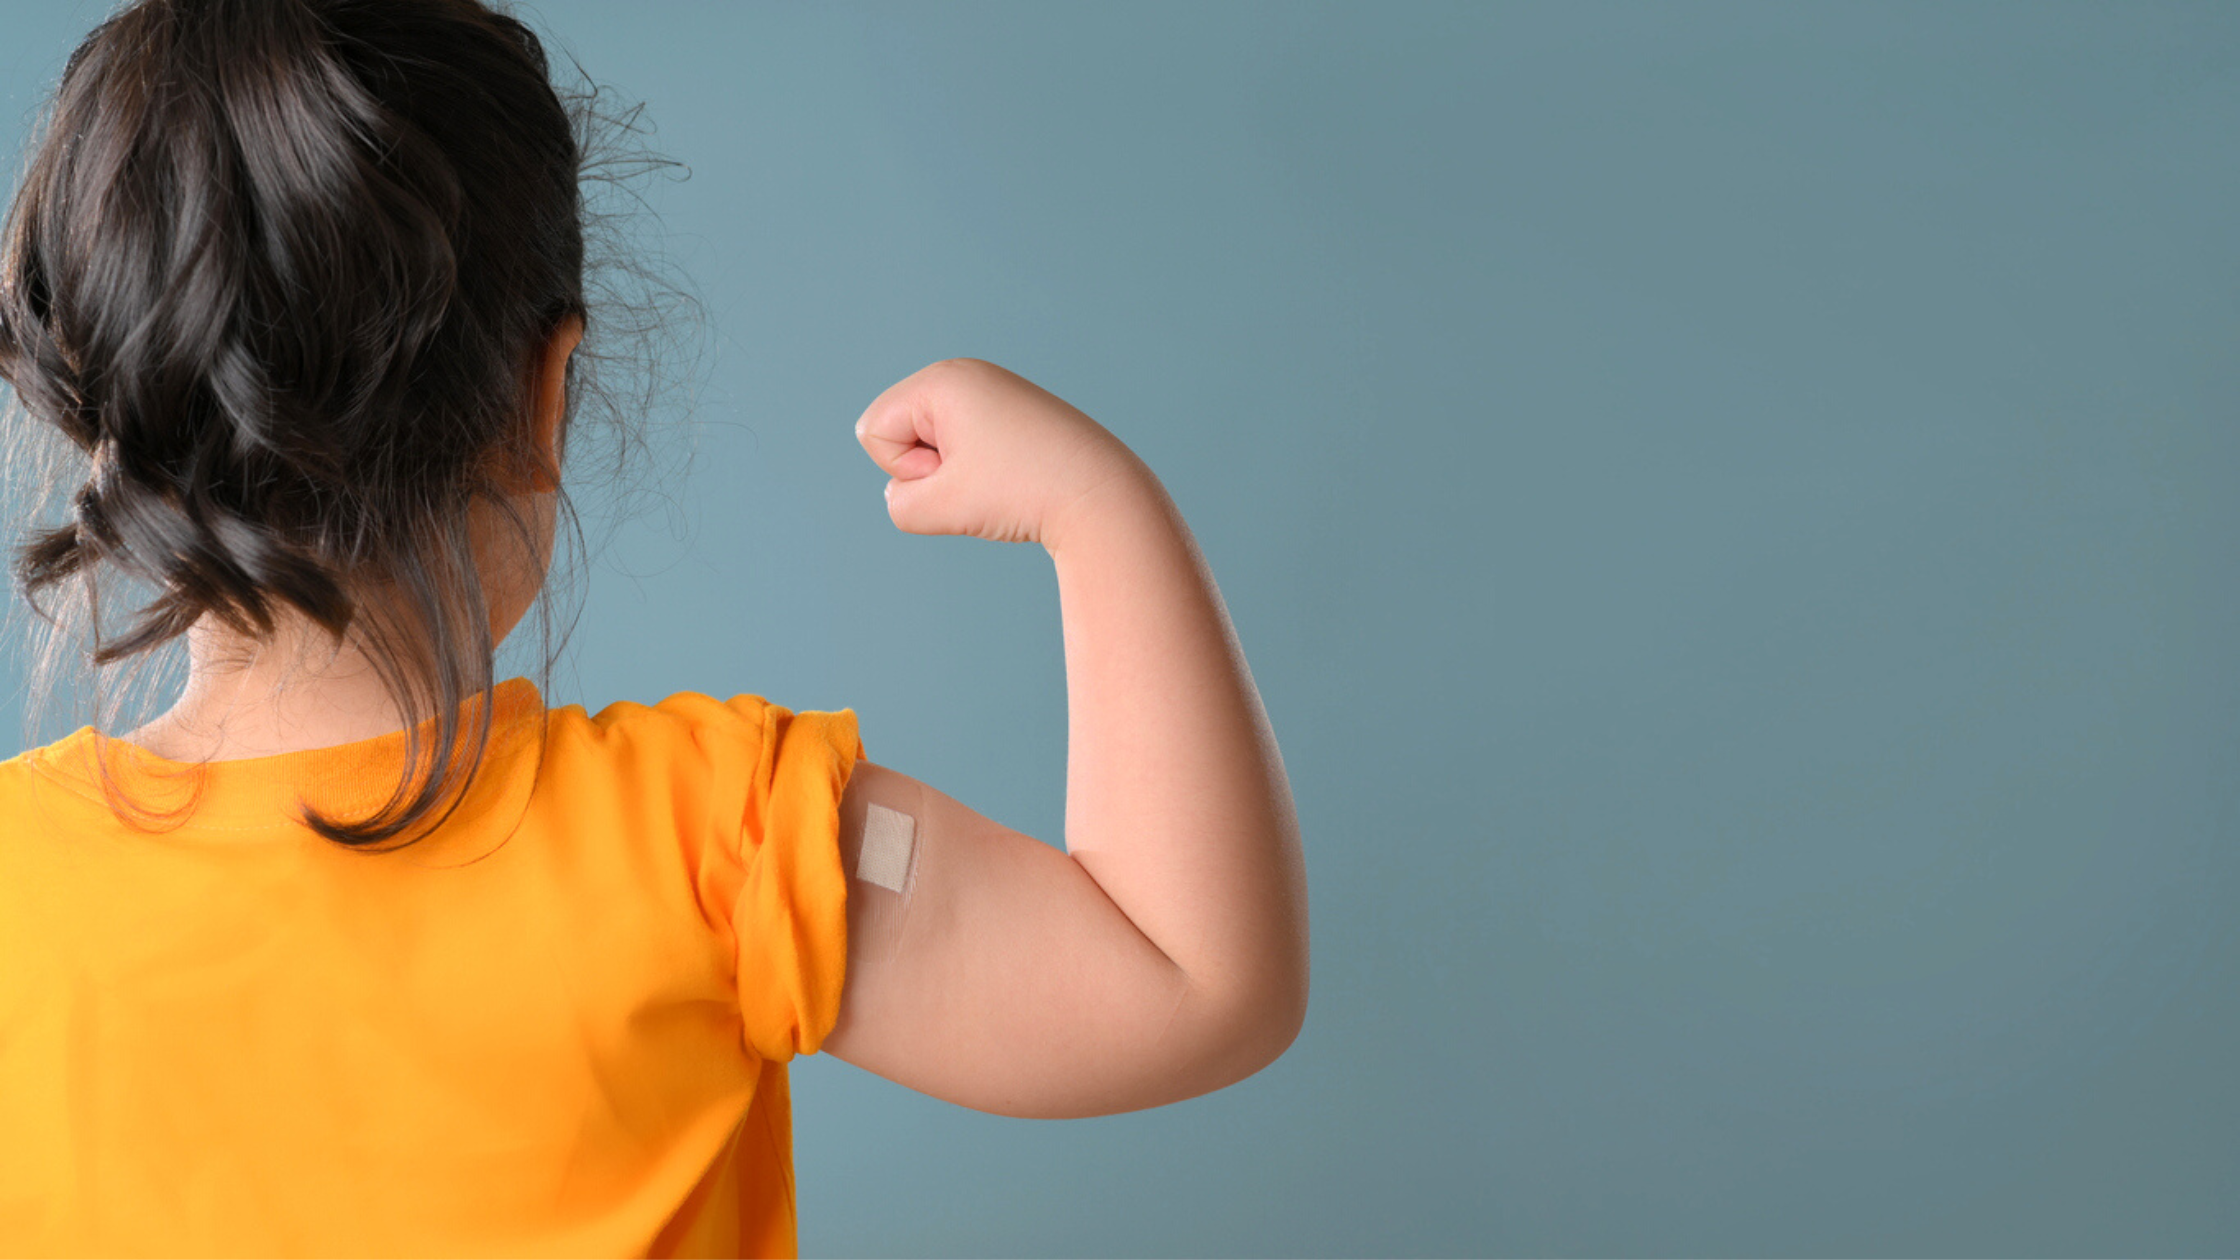 A little girl is showing off her bandage knowing that kids and vaccinations go together.